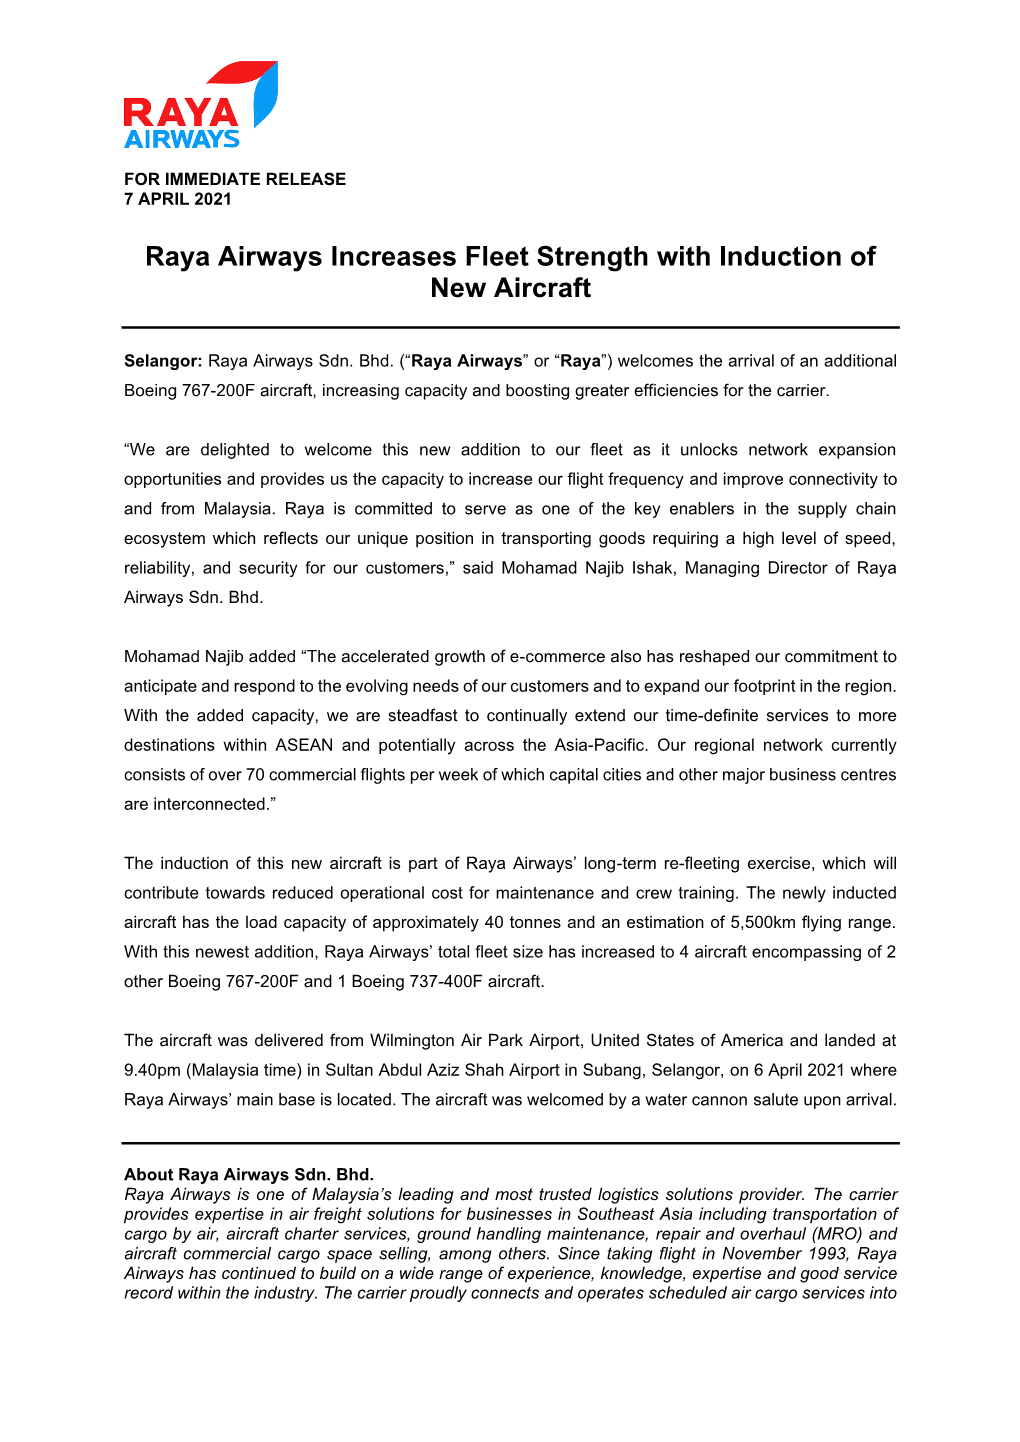 Raya Airways Increases Fleet Strength with Induction of New Aircraft